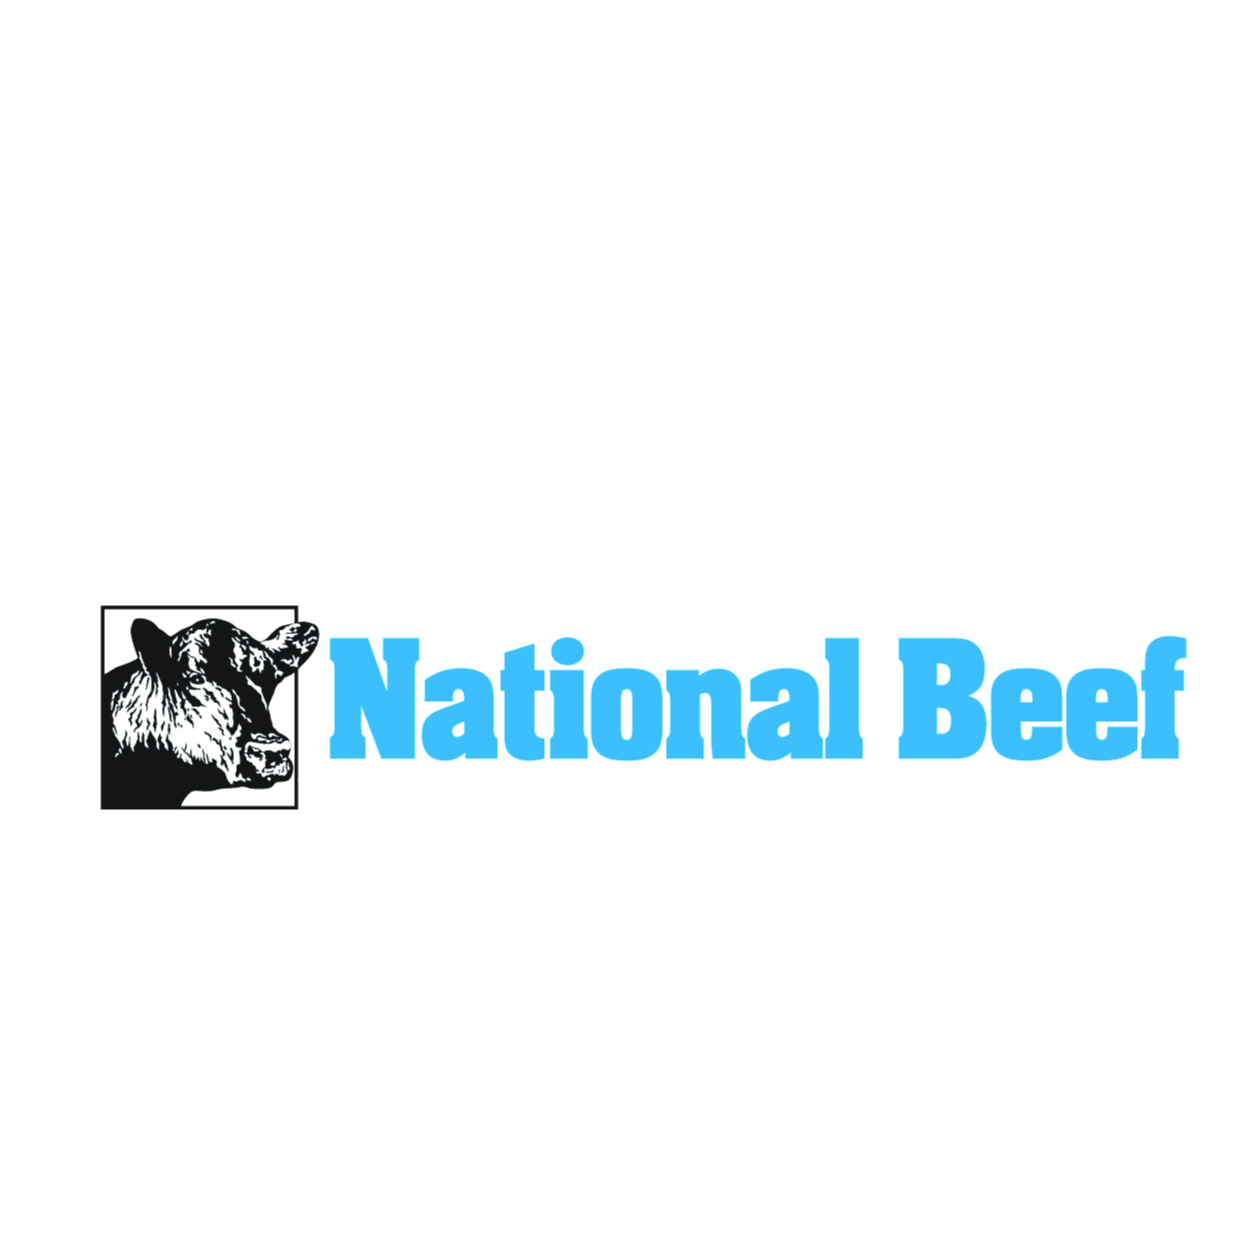 National Beef Packing Company